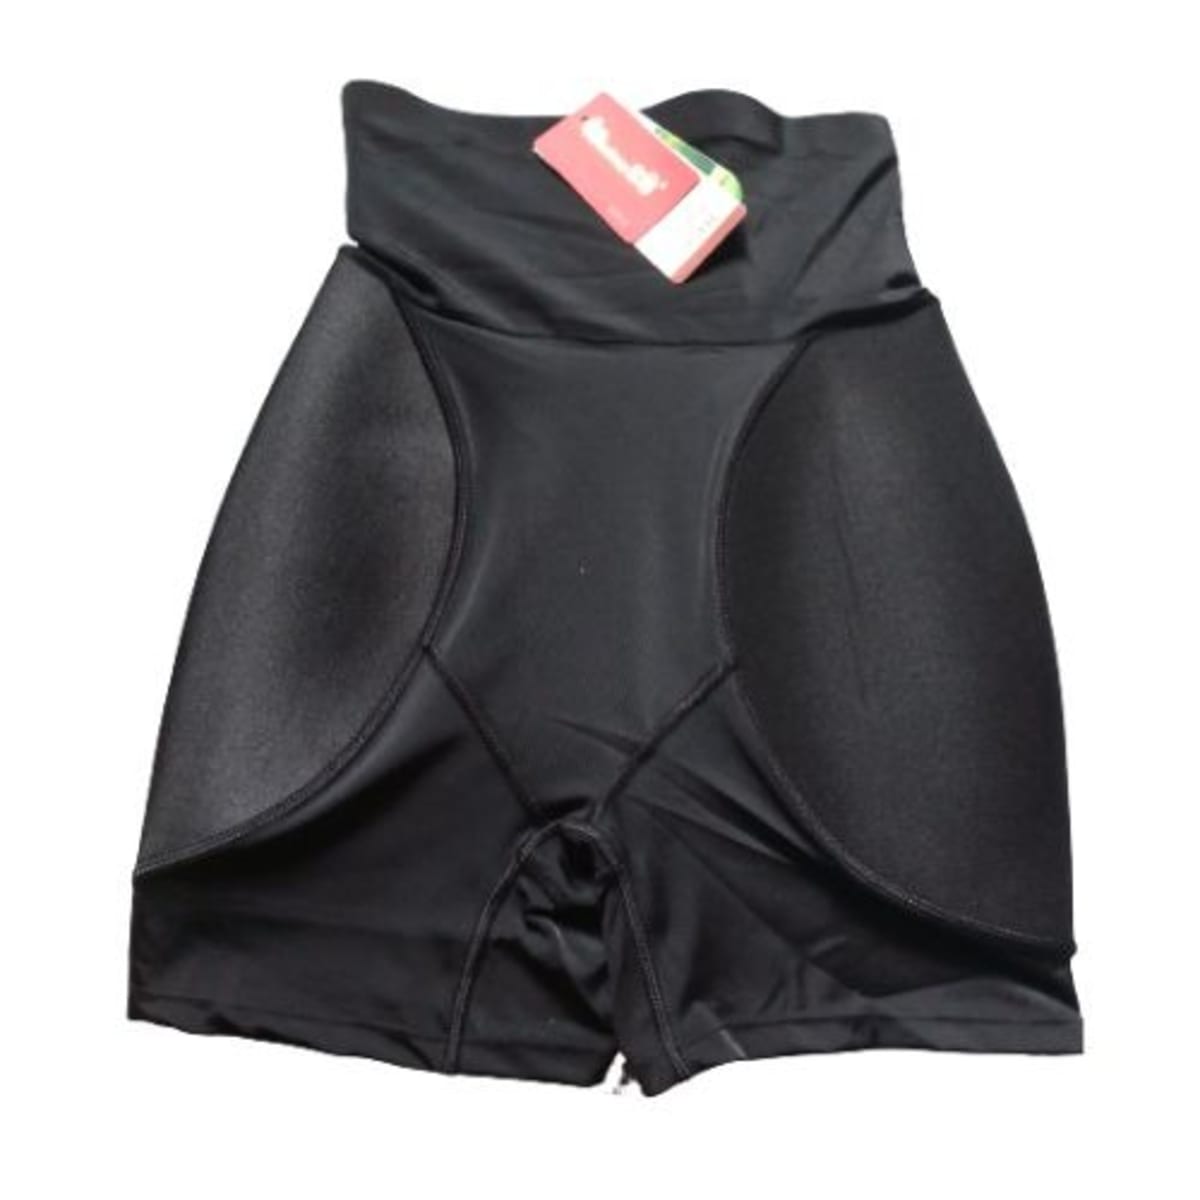 Butt And Hip Pad @available in Nigeria, Buy Online - Best Price in Nigeria